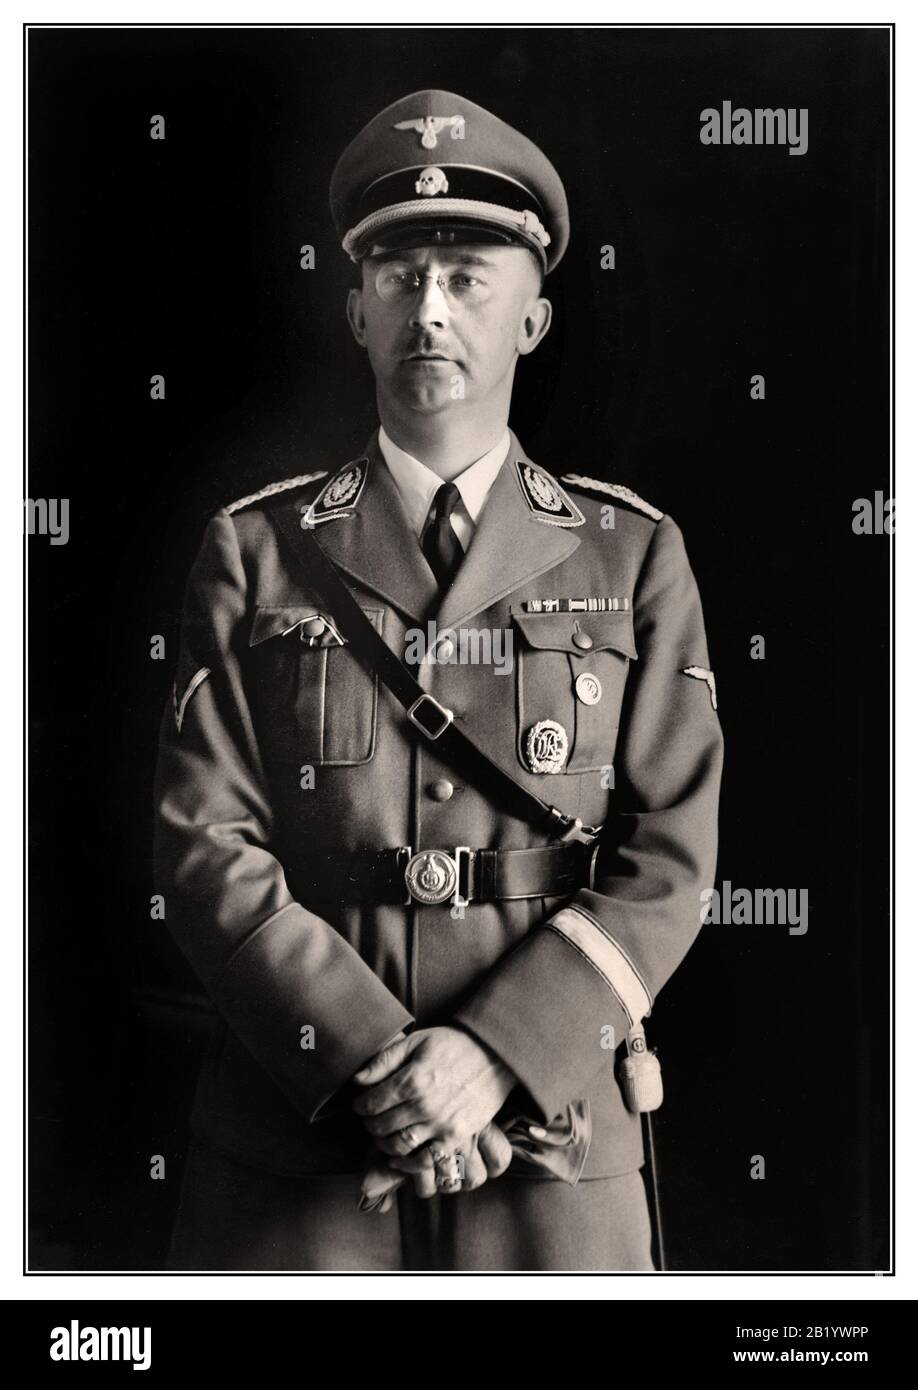 Heinrich Himmler Archive Portrait 1940 Reichsführer Heinrich Himmler, Chief of police and SS in the Third Reich. Portrait photo taken on the occasion of his 40th birthday. Heinrich Luitpold Himmler was Reichsführer of the Schutzstaffel, and a leading member of the Nazi Party of Germany. Himmler was one of the most powerful men in Nazi Germany and a main architect of the Holocaust. Undoubtedly guilty of war crimes against humanity, committed suicide whilst in custody awaiting trial. Stock Photo